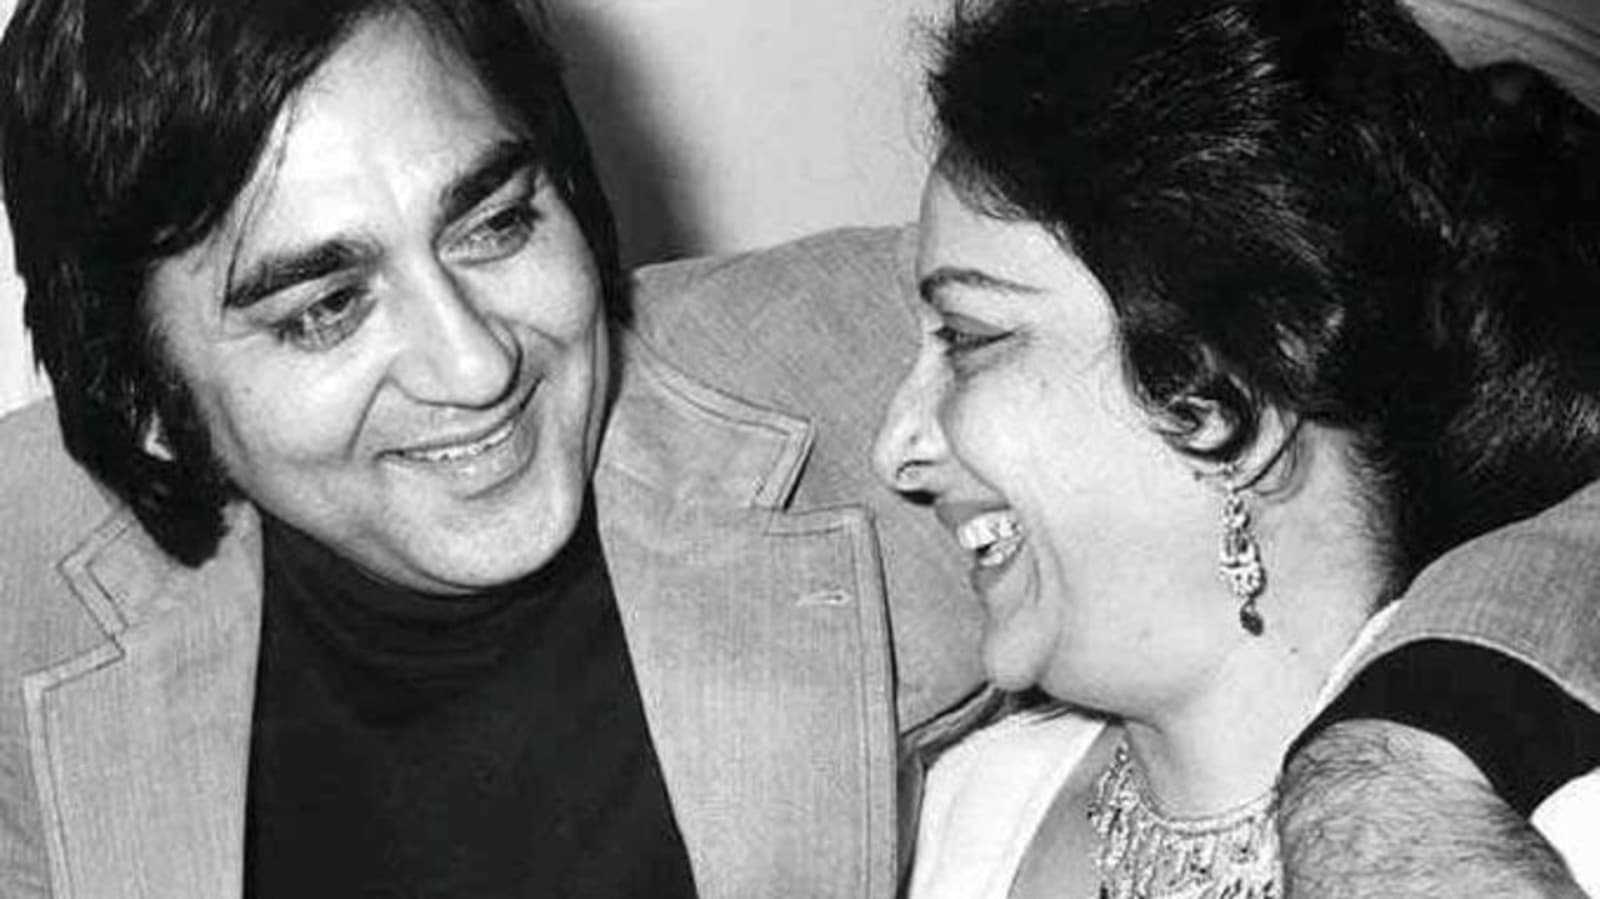 Pornsex Of Nargis Dutt - The Nargis and Sunil Dutt love story: When he saved her from fire and she  found the love of her life | Bollywood - Hindustan Times